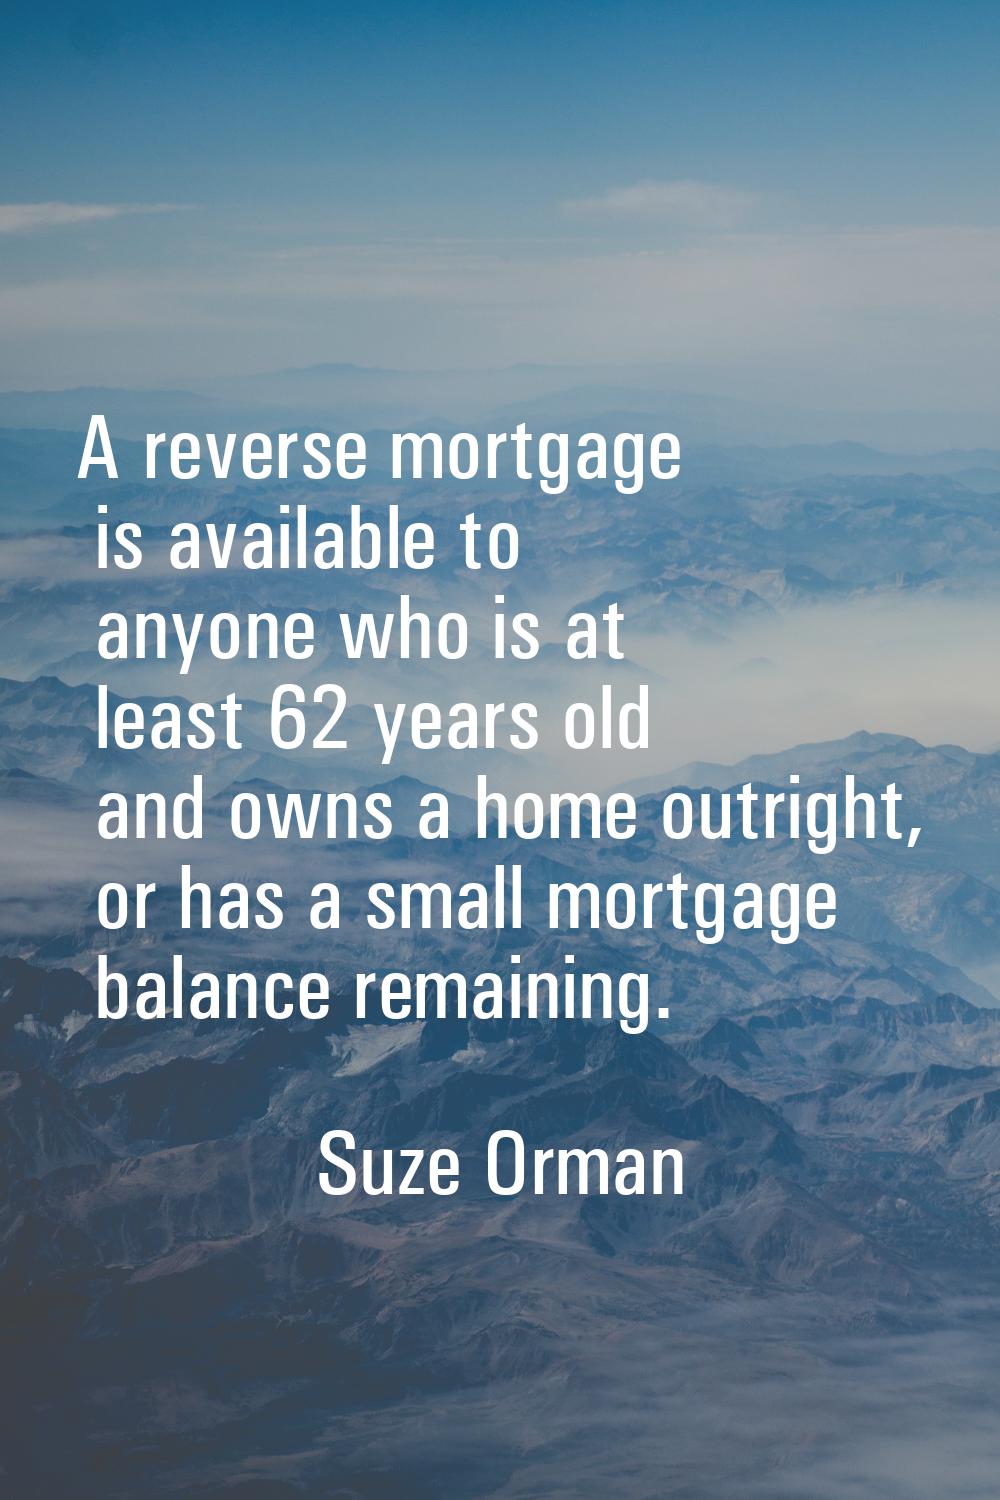 A reverse mortgage is available to anyone who is at least 62 years old and owns a home outright, or